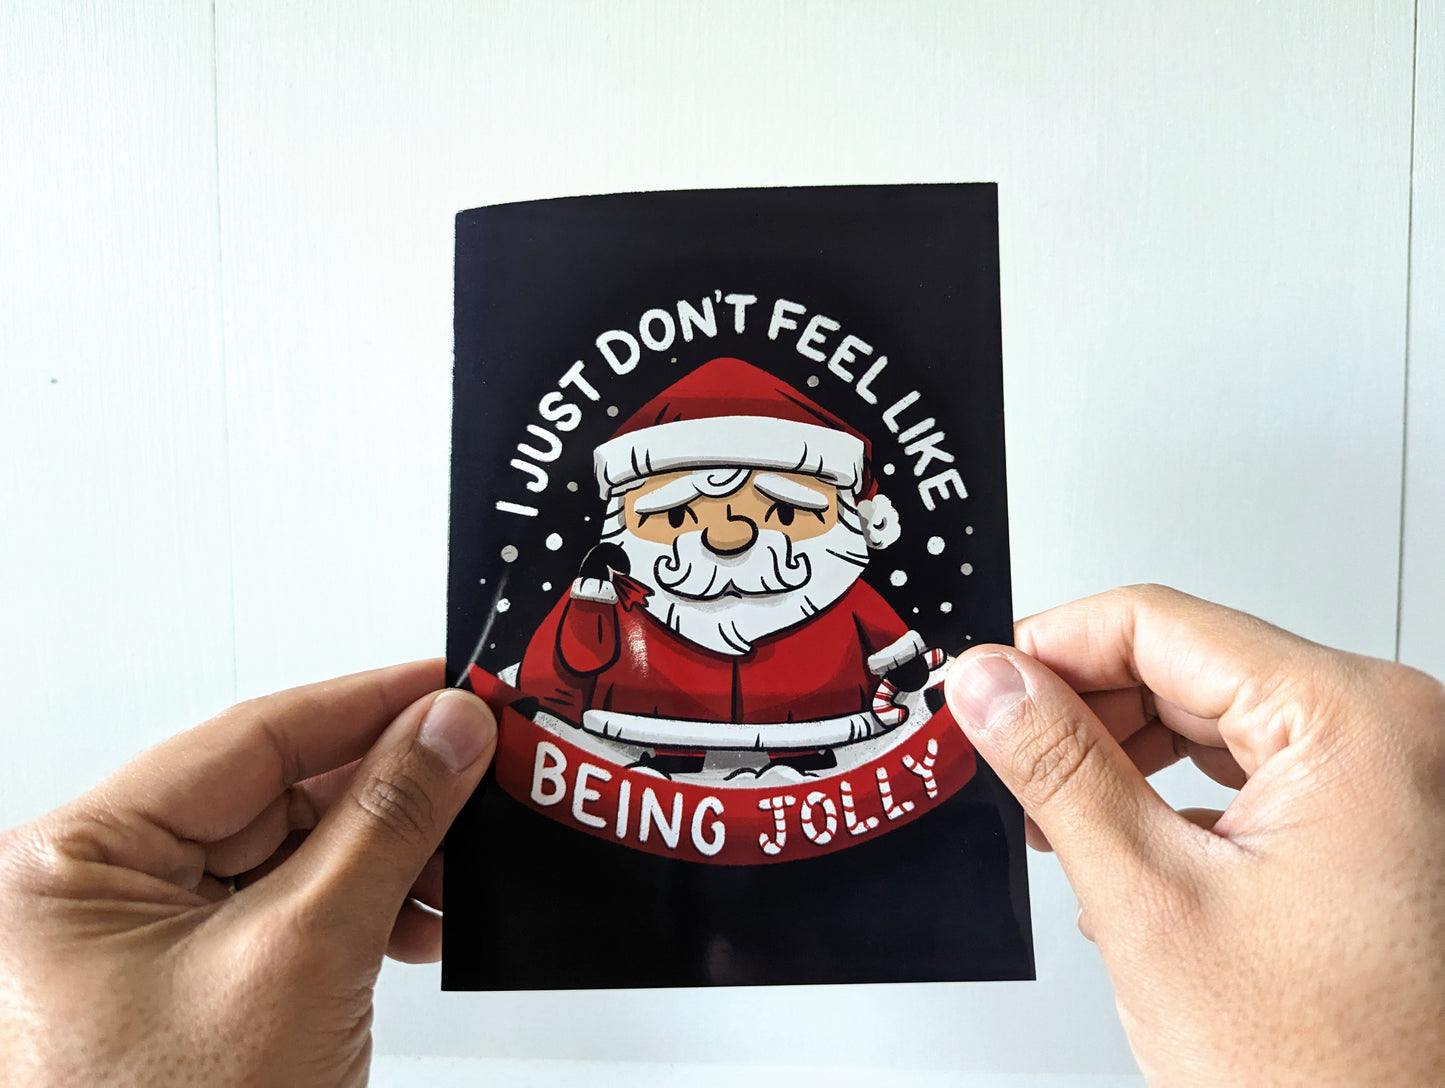 Not So Jolly St Nick - Funny Christmas Card